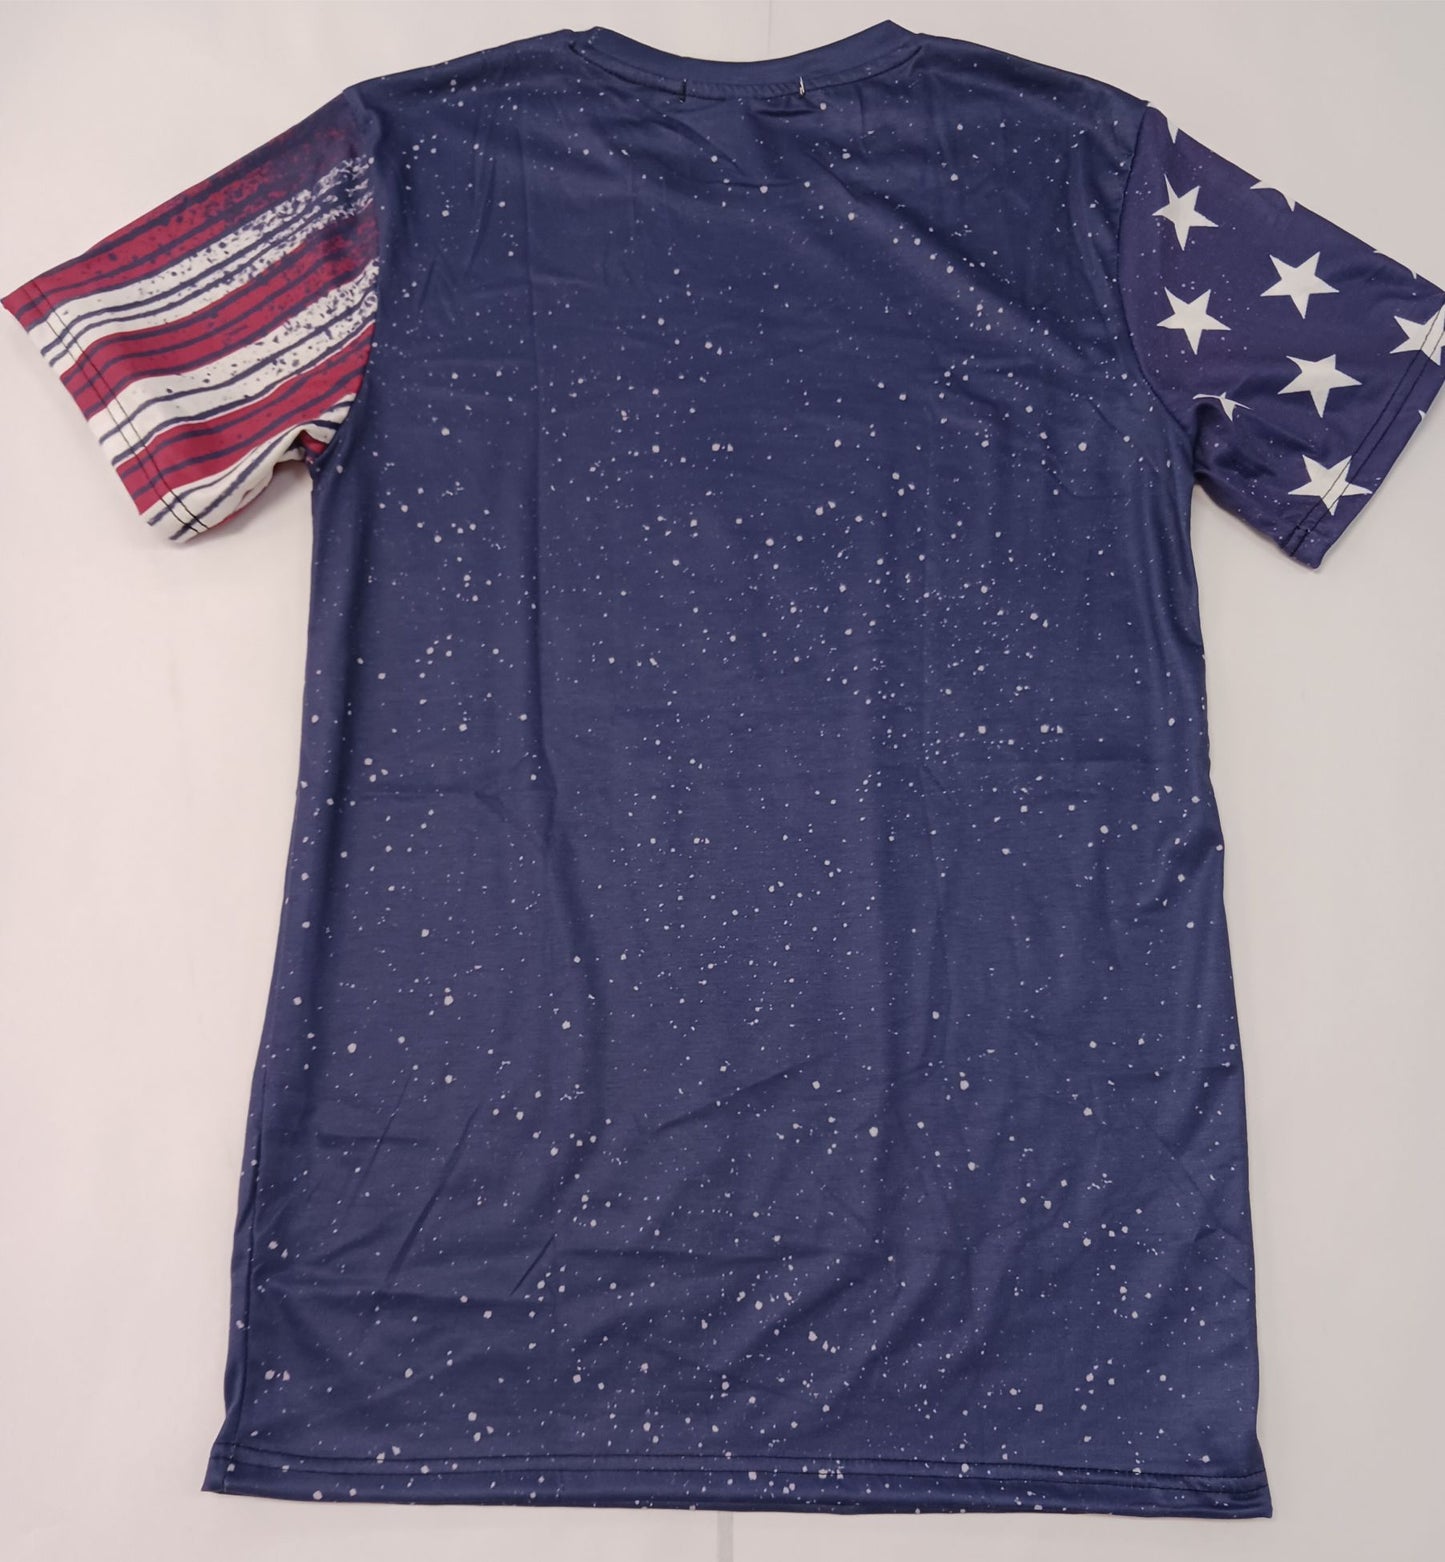 Youth T Shirt American Stripe And Star - Read Description